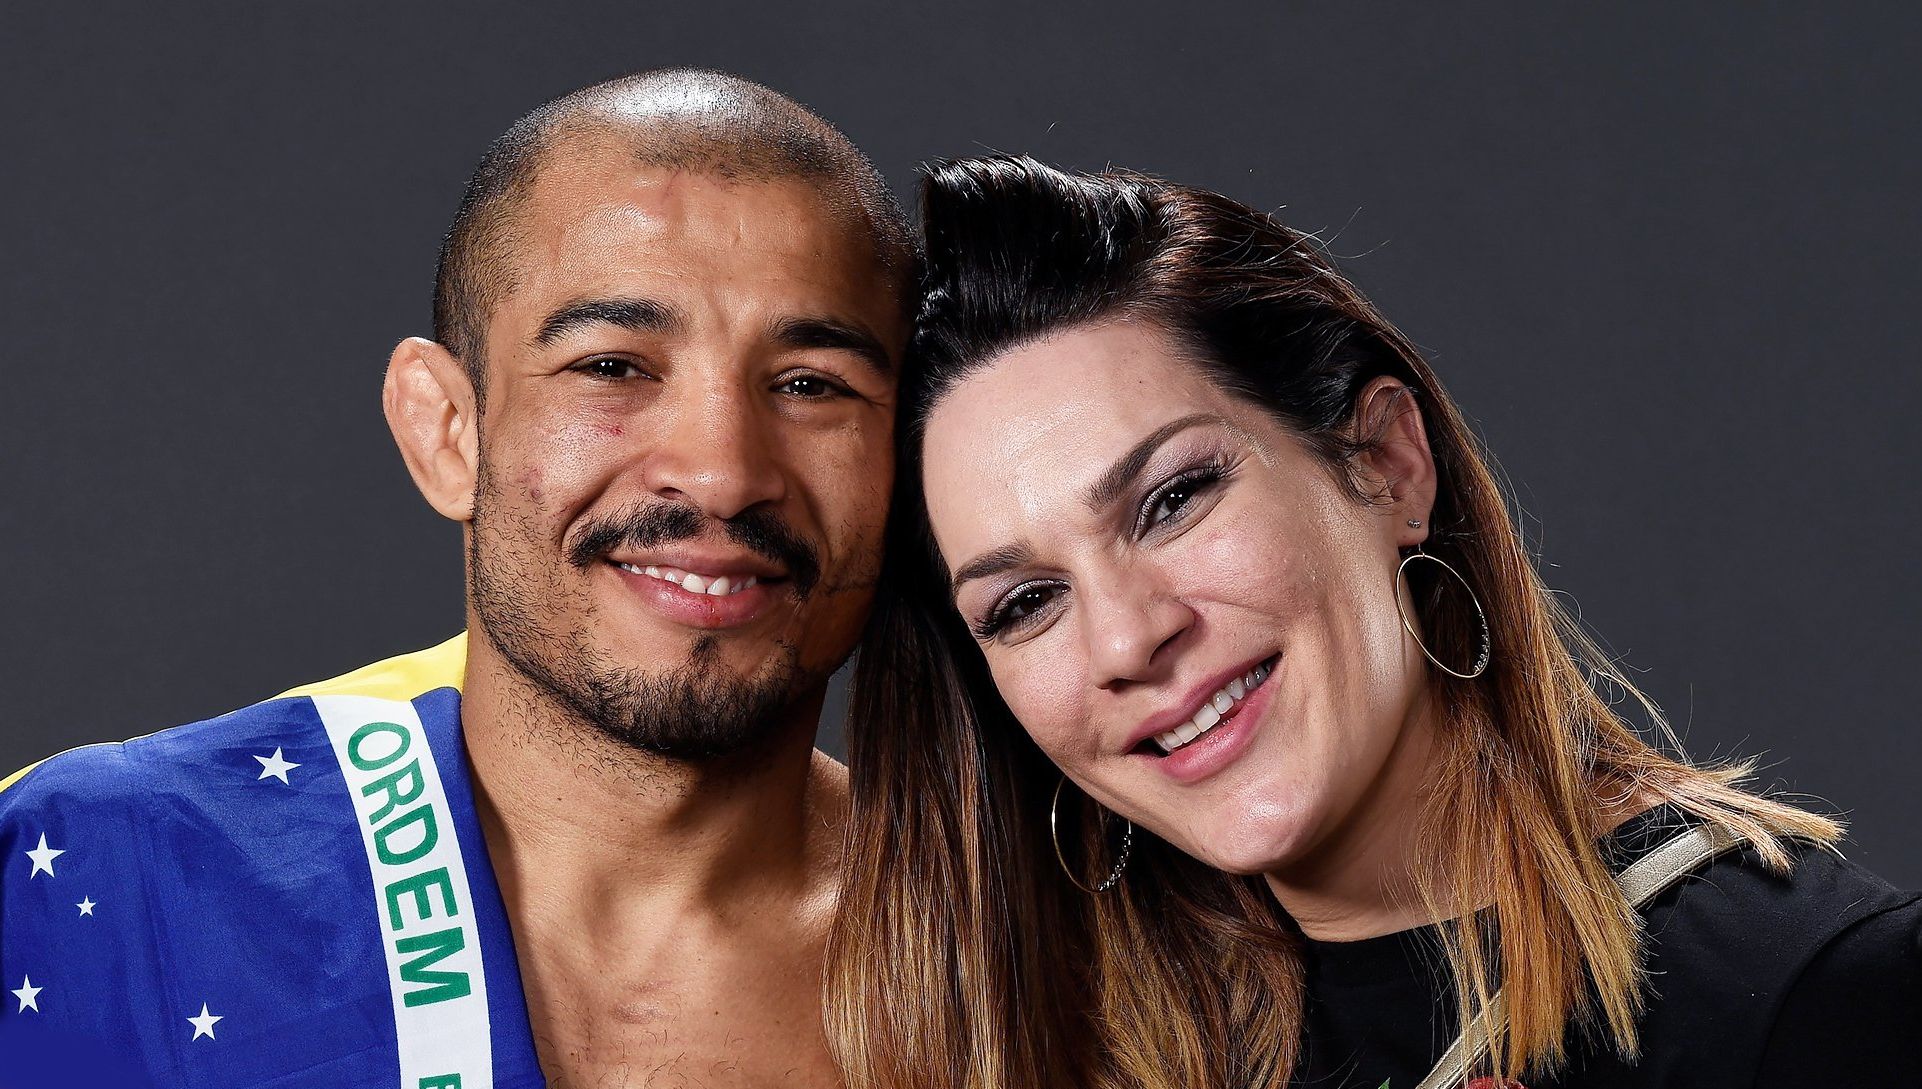 Aldo and his wife accused of embezzling public money